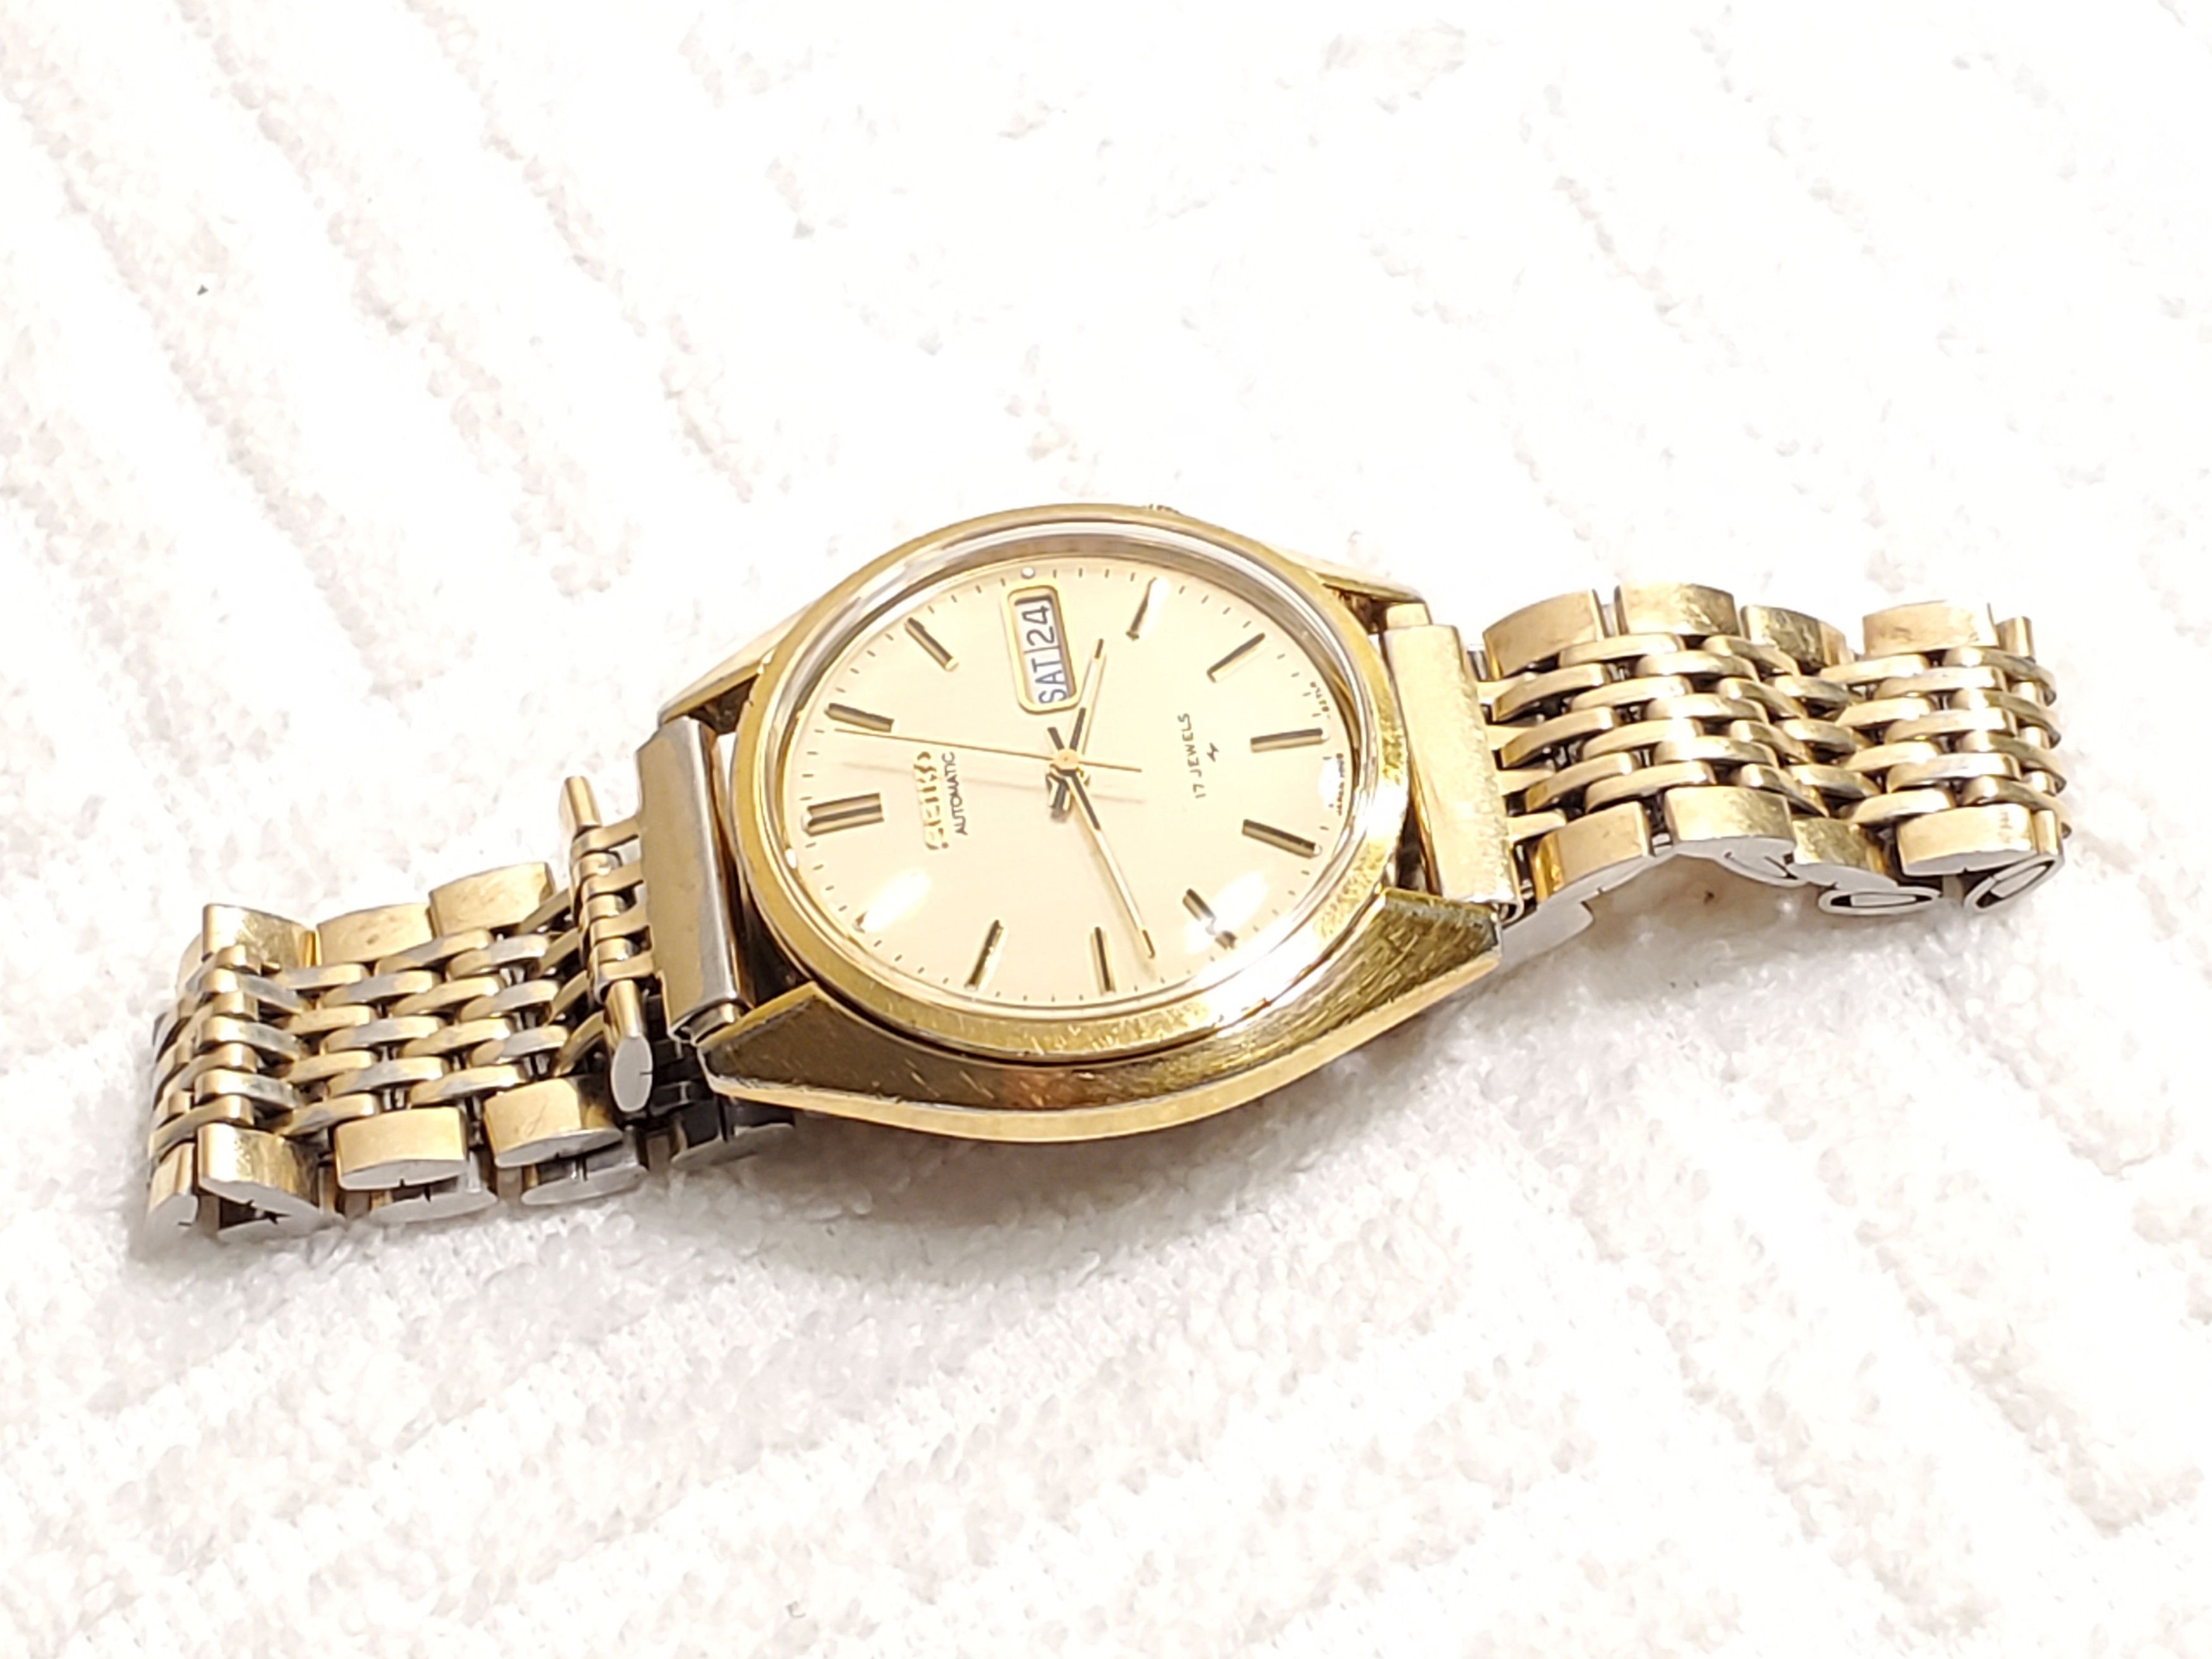 Seiko Vintage Seiko Automatic Day Date Watch Seventeen Jewels Size 36 - 2 Preview